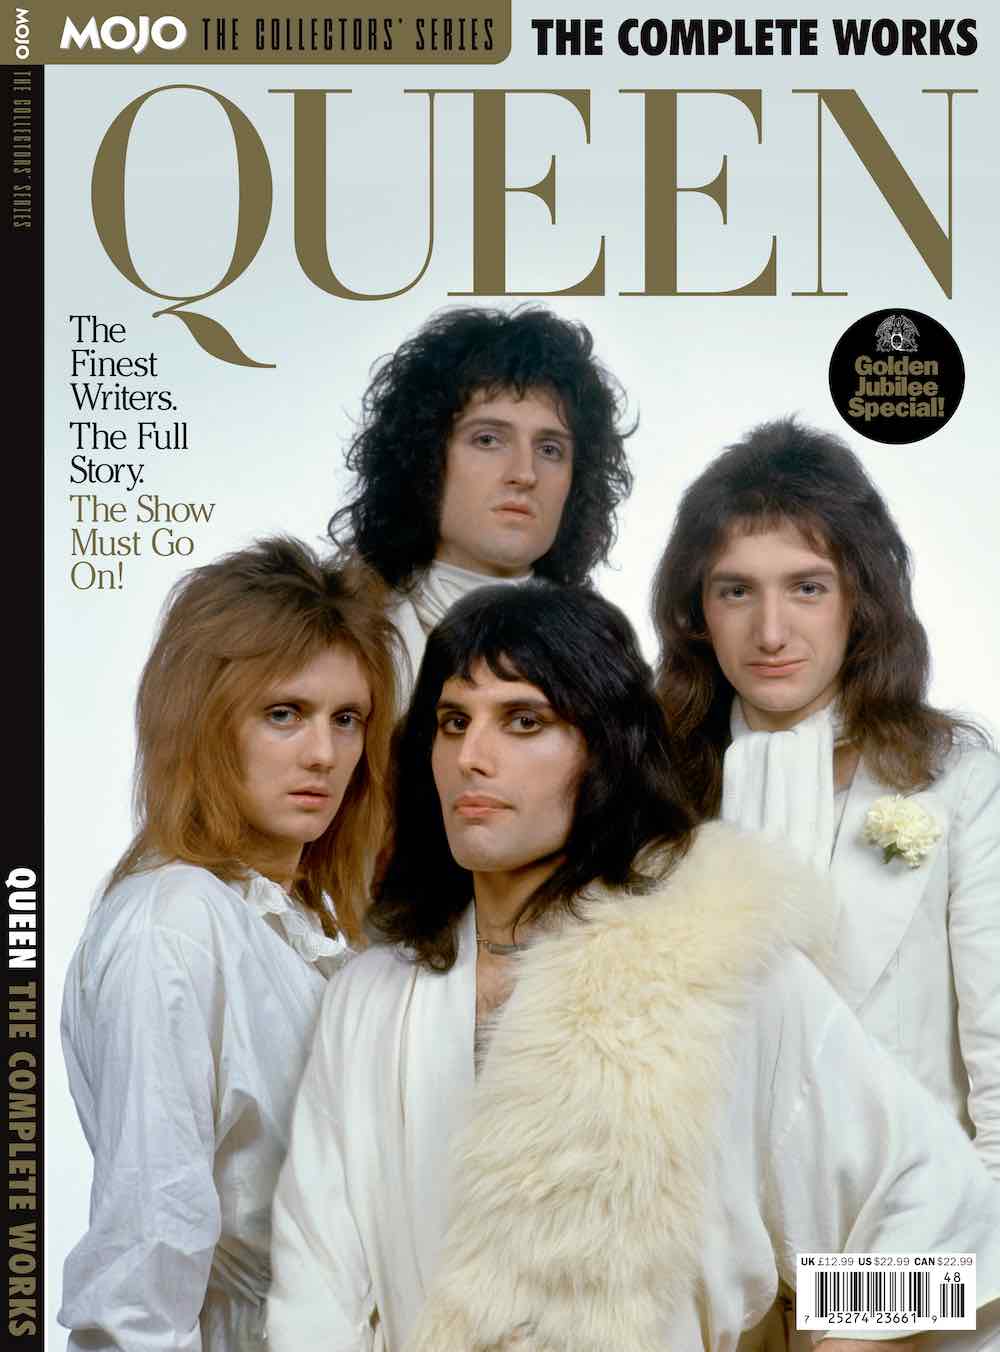 Mojo Collectors Series Queen – Iconic magazines